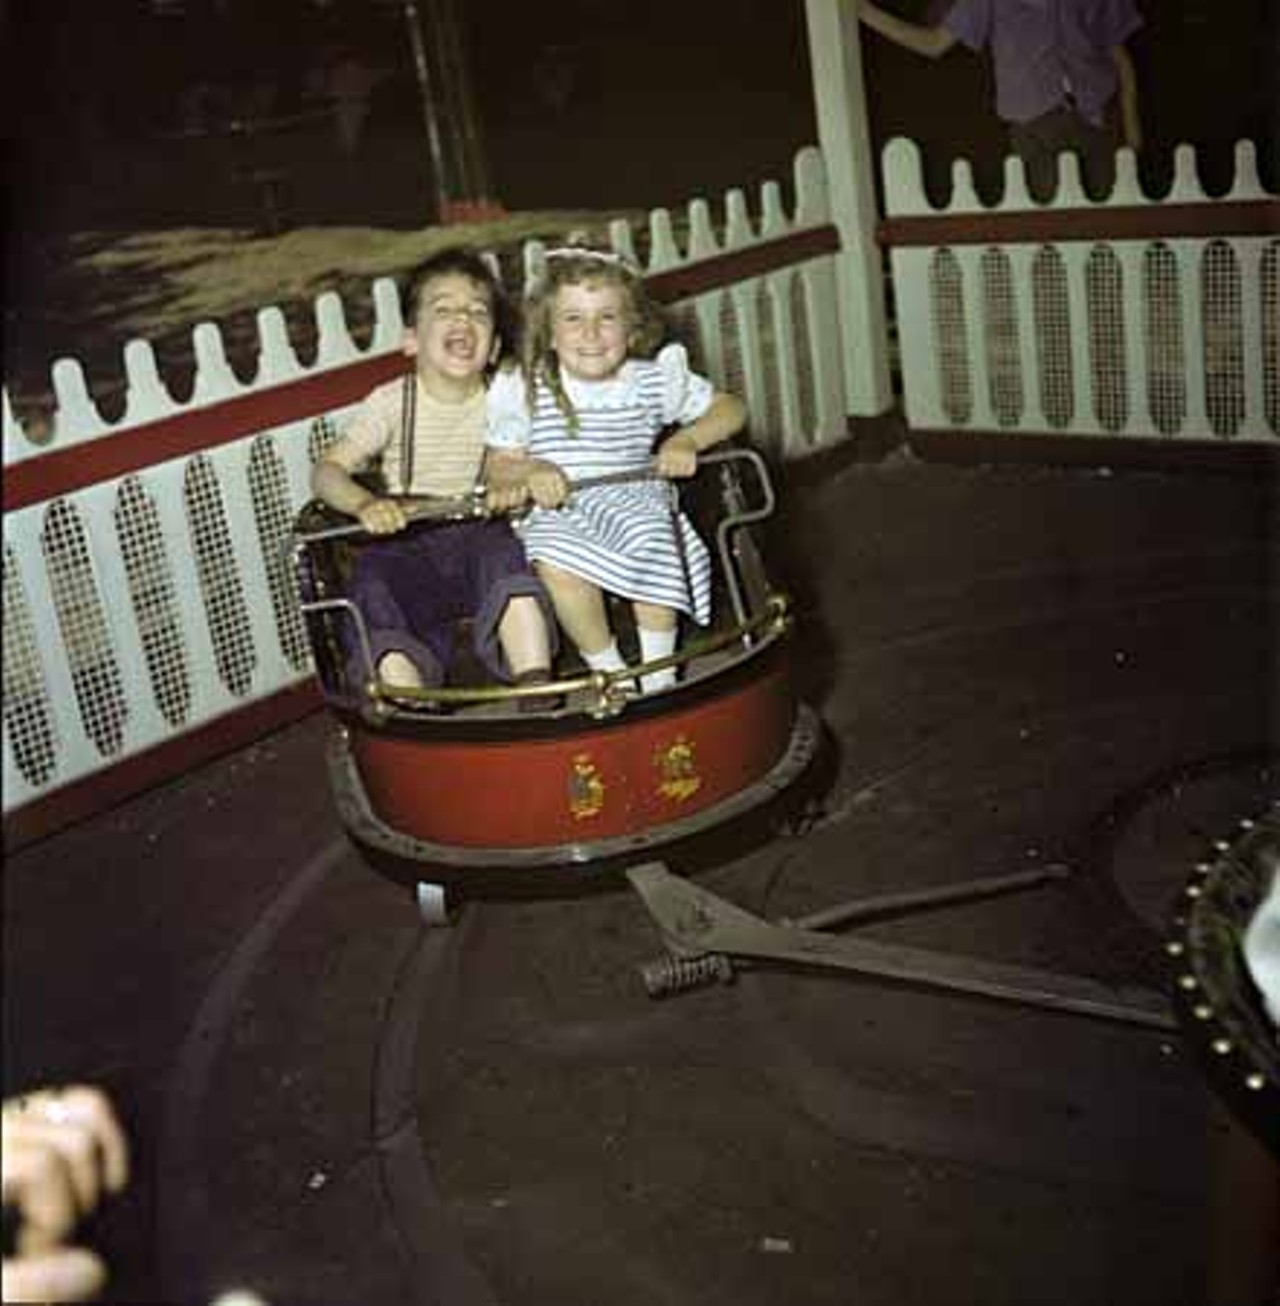 1947. Oh, the joys of kiddie rides.